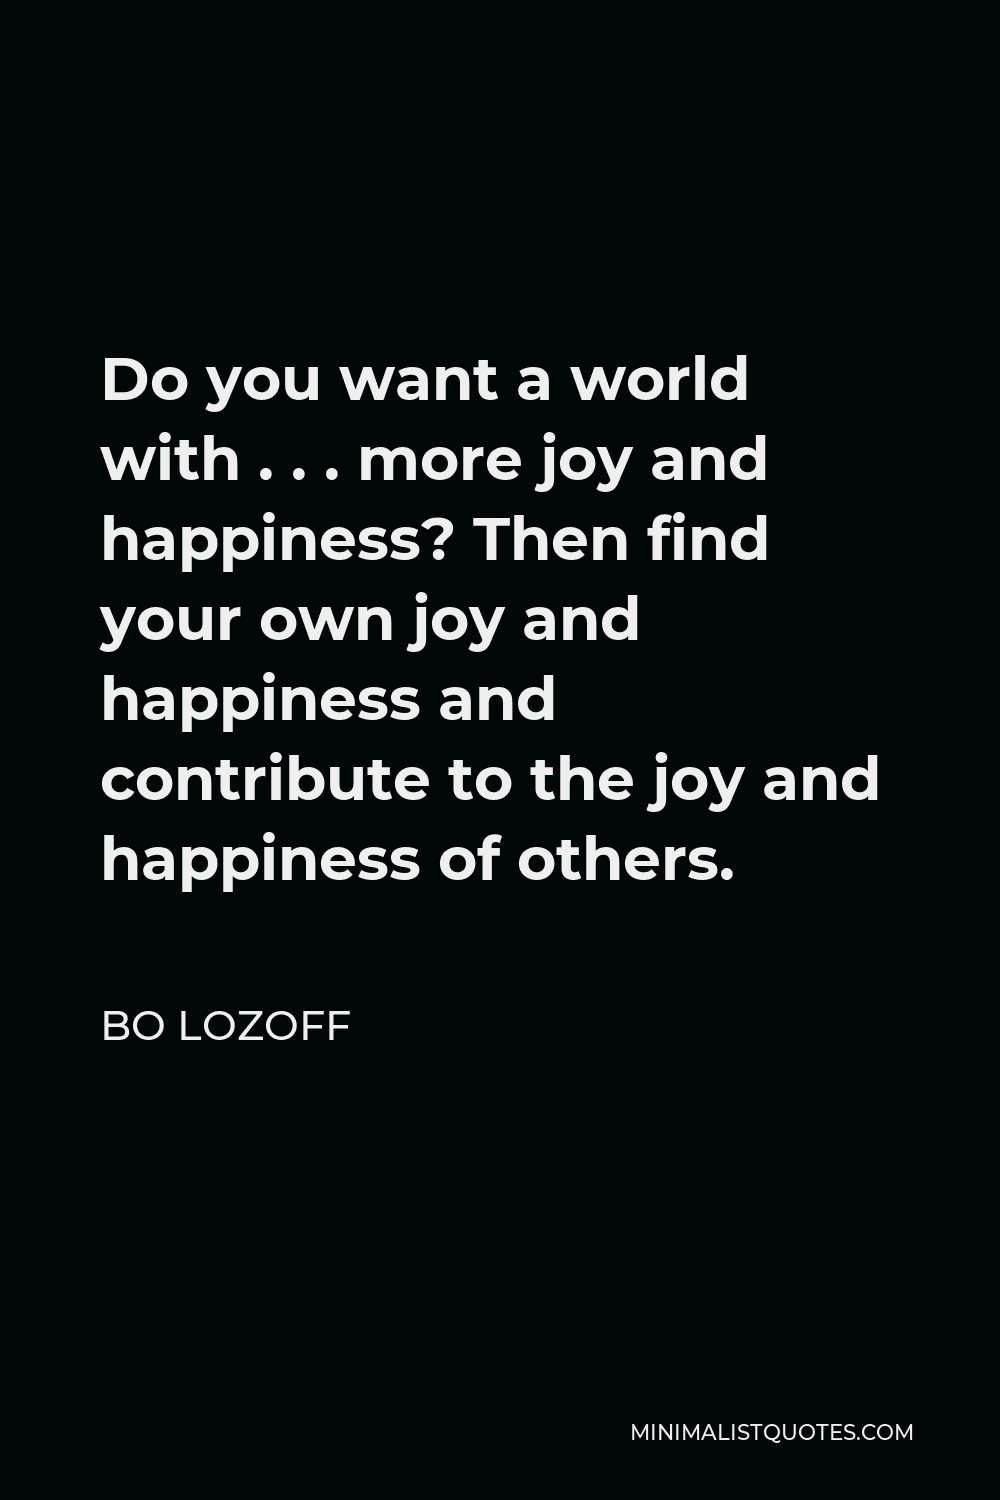 Bo Lozoff Quote - Do you want a world with . . . more joy and happiness? Then find your own joy and happiness and contribute to the joy and happiness of others.